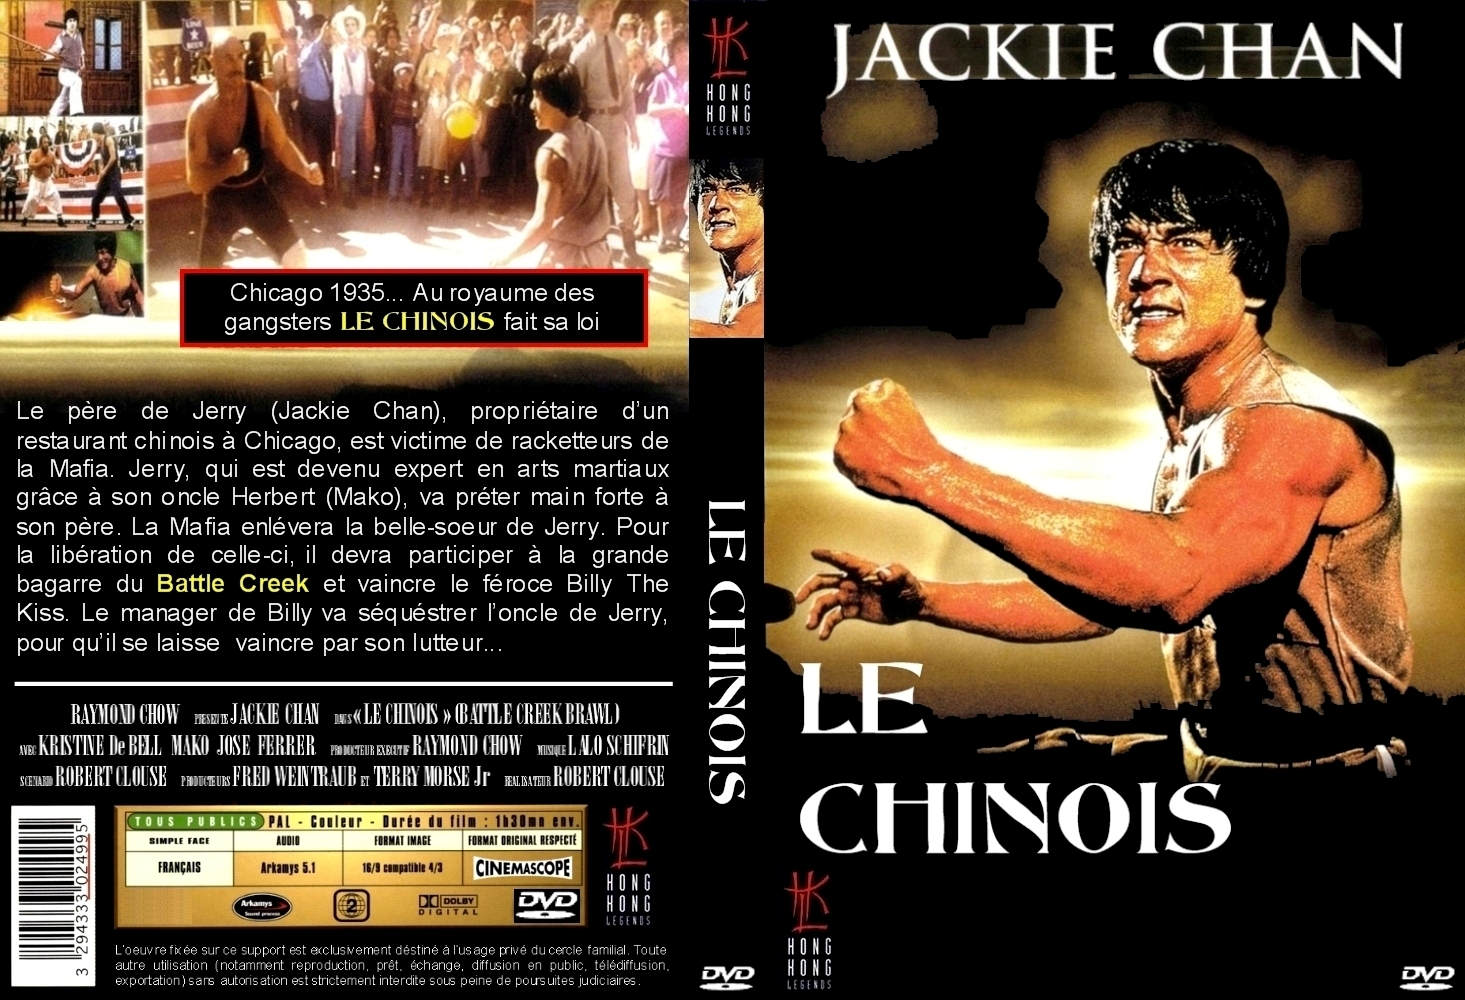 Jaquette DVD Le chinois custom